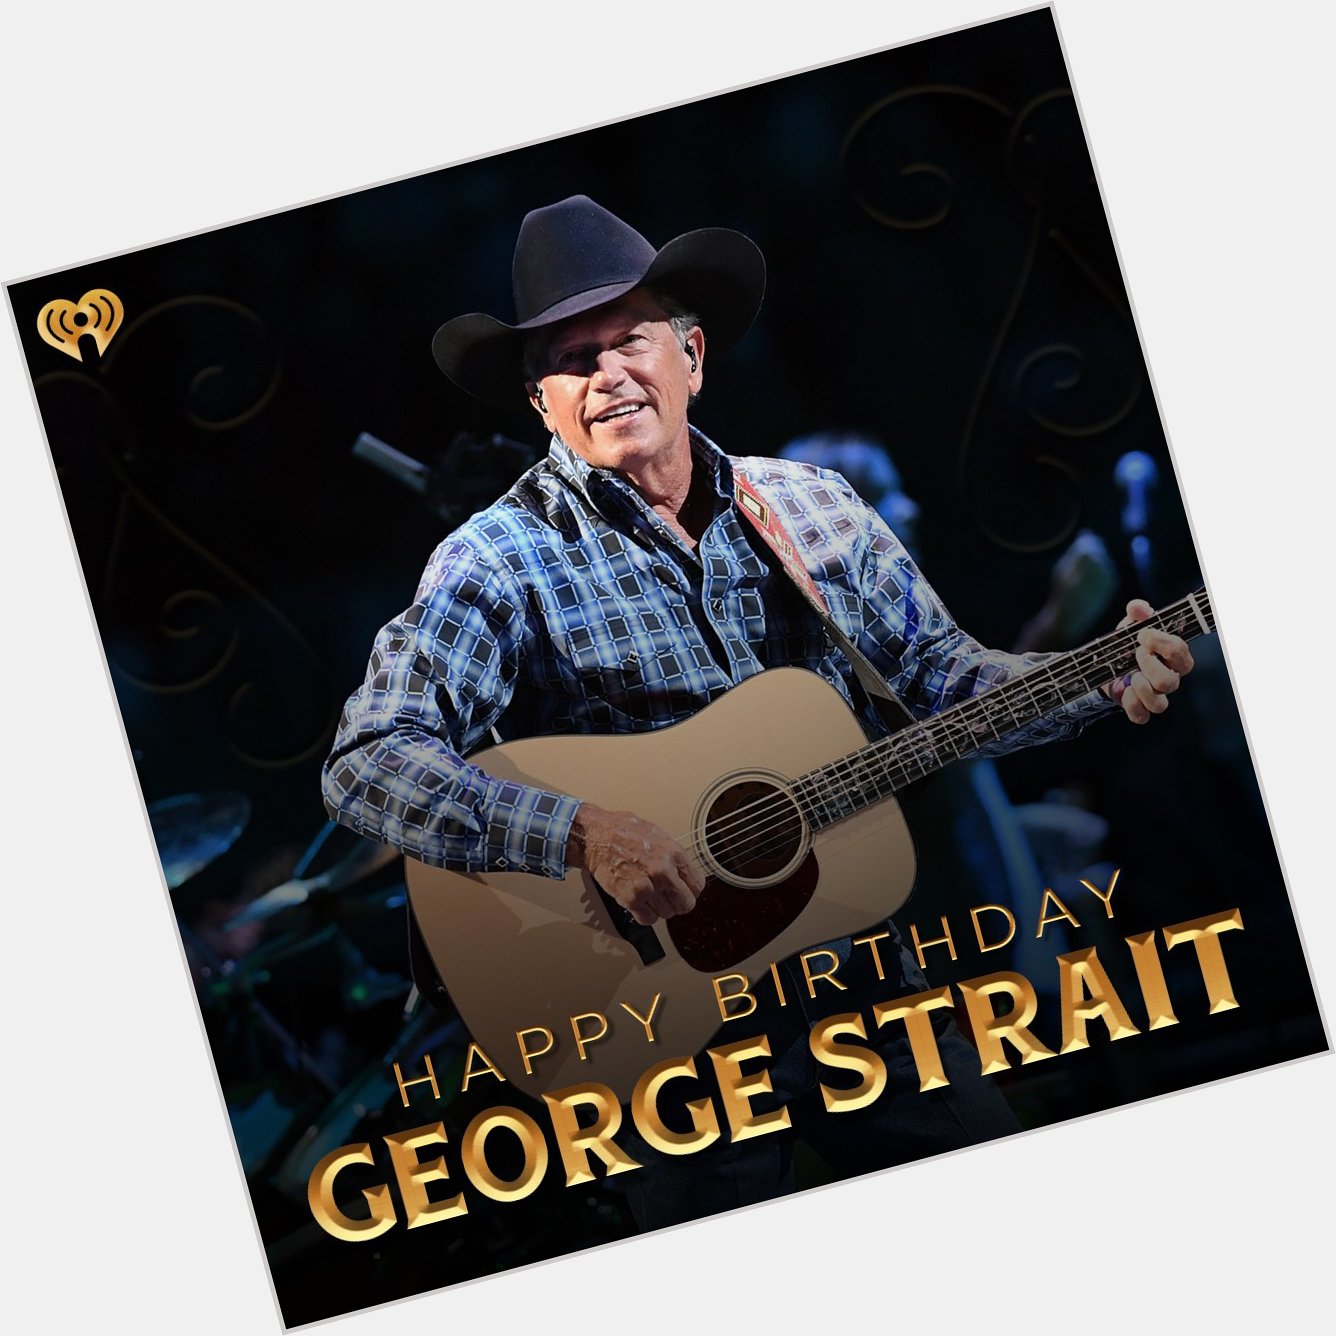 Happy Birthday to a country music legend, George Strait! 